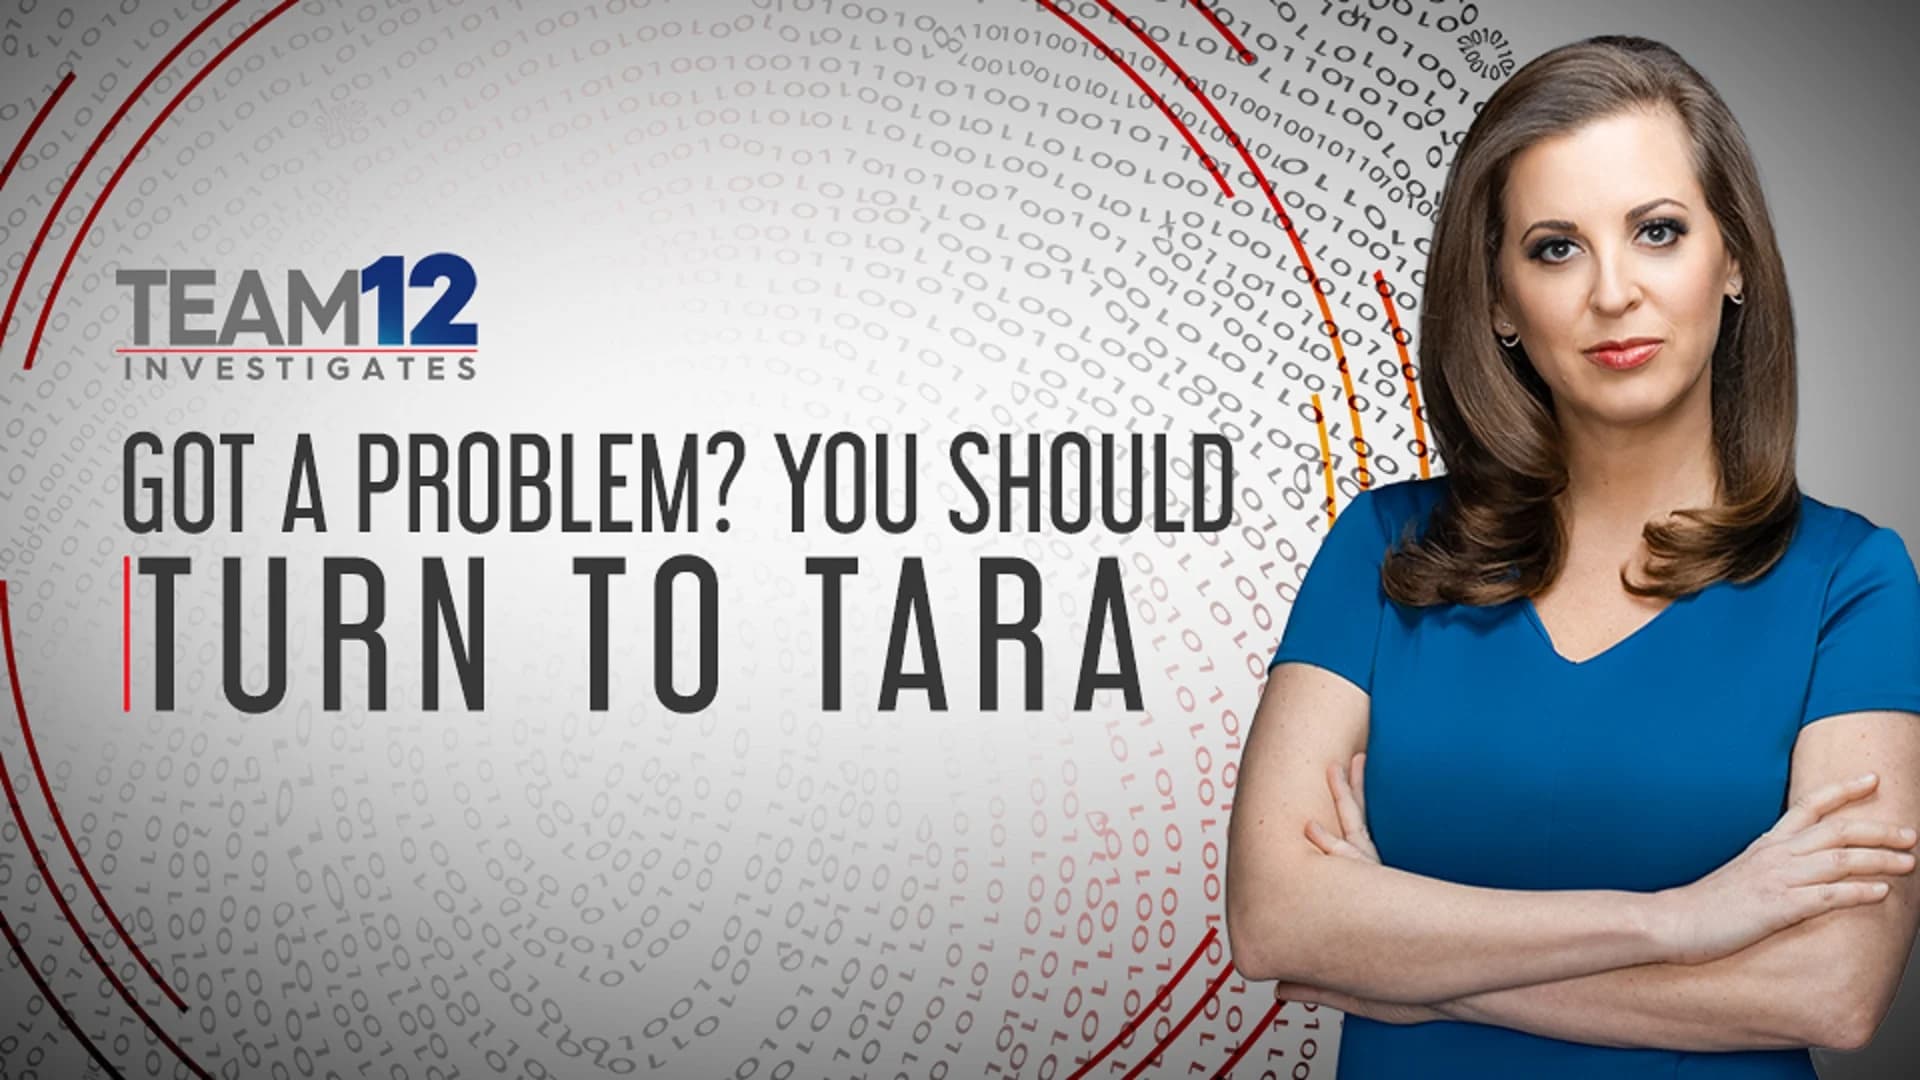 Got a problem? You Should Turn To Tara. Here's How.